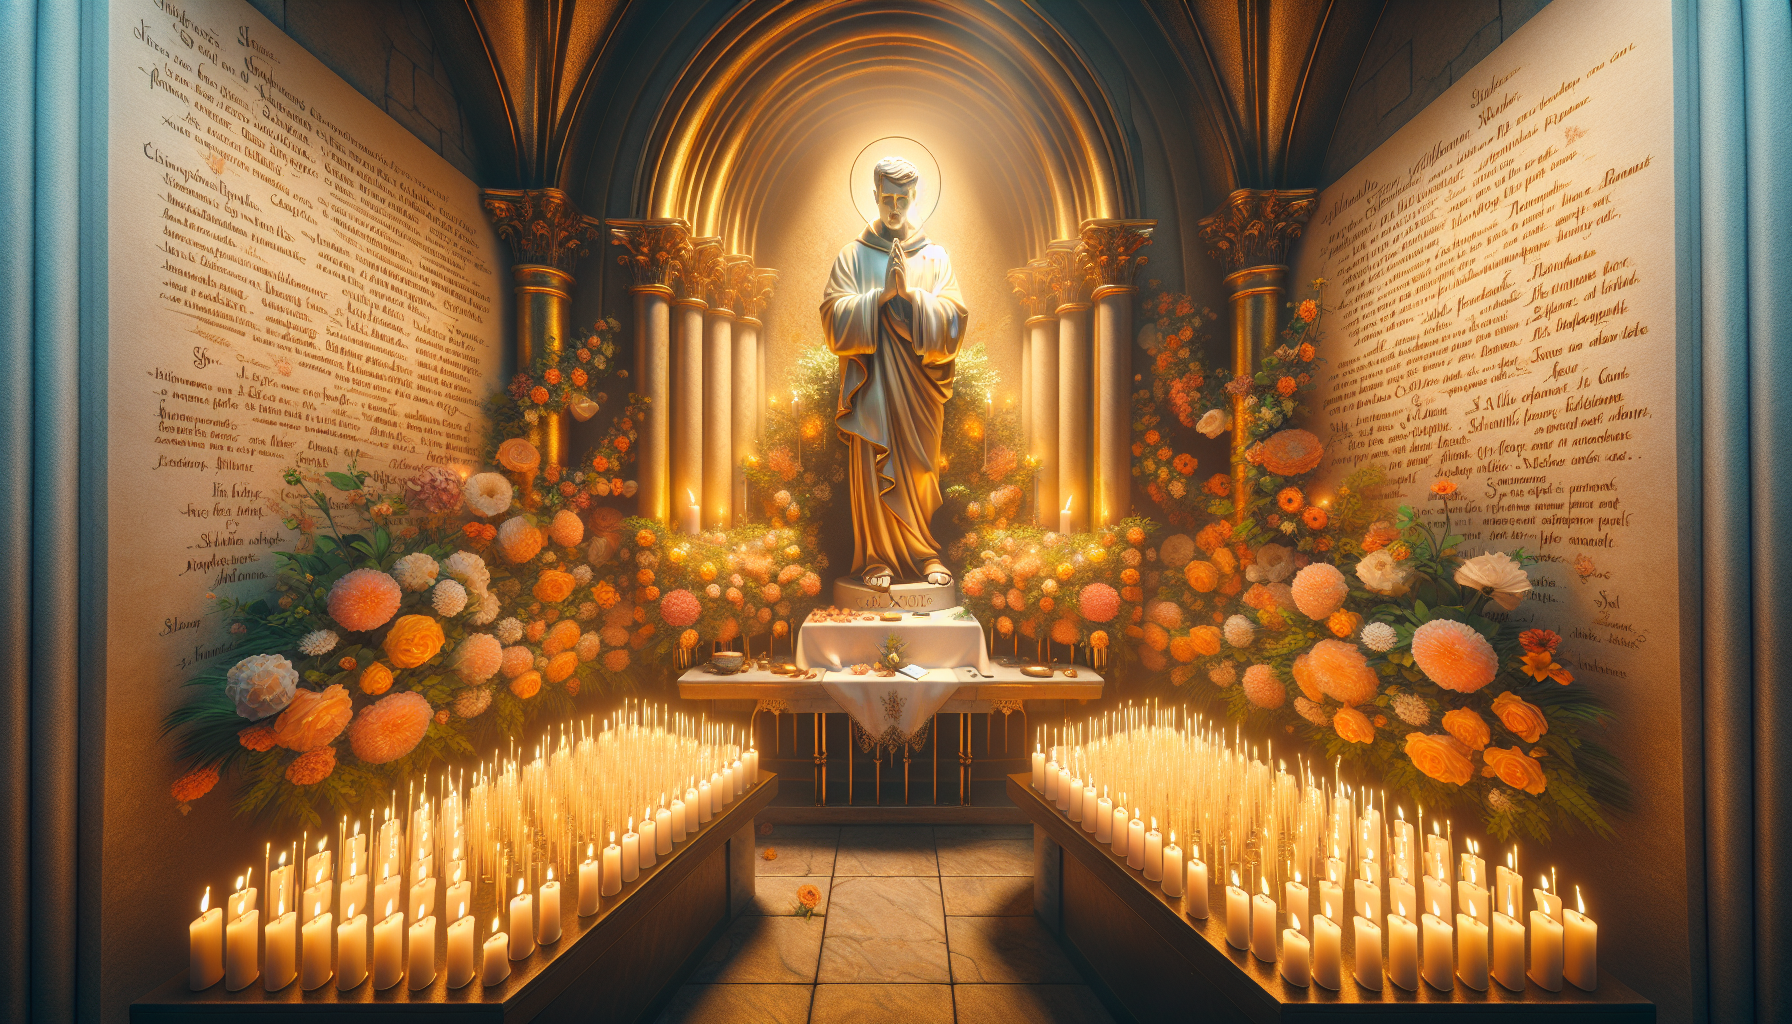 Create an image of a serene, candlelit chapel with a soft golden glow. In the center, a statue of Saint Alexius (San Alejo) is depicted in a humble, prayerful pose. Surrounding the statue are votive c